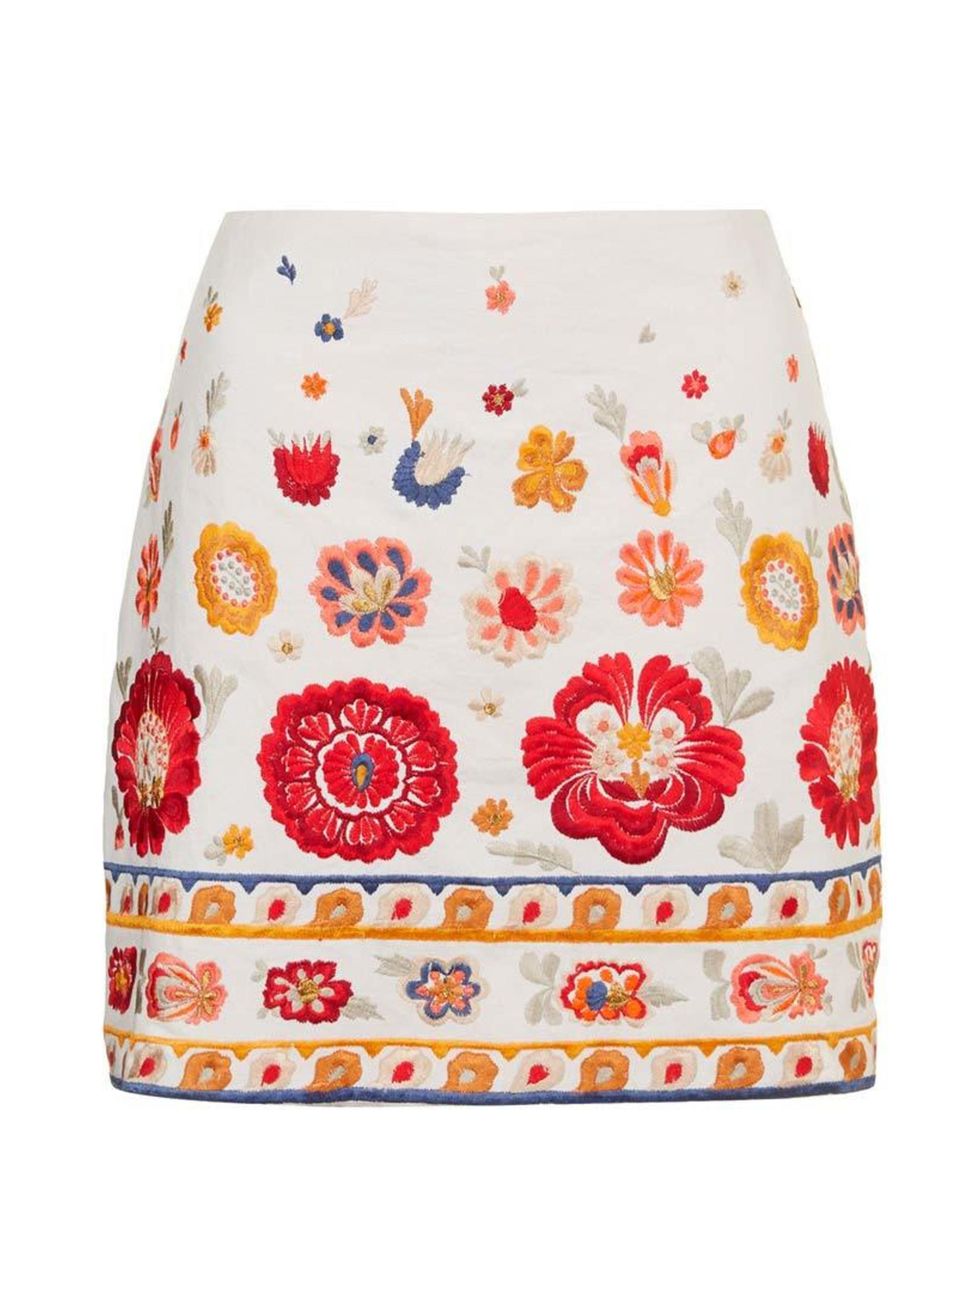 <p>Pair this intricately embroidered skirt with a simple denim shirt.</p>

<p><a href="http://www.topshop.com/en/tsuk/product/new-in-this-week-2169932/new-in-this-week-493/troubadour-embroidered-pelmet-skirt-4180528?bi=1&ps=200" target="_blank">Topshop</a